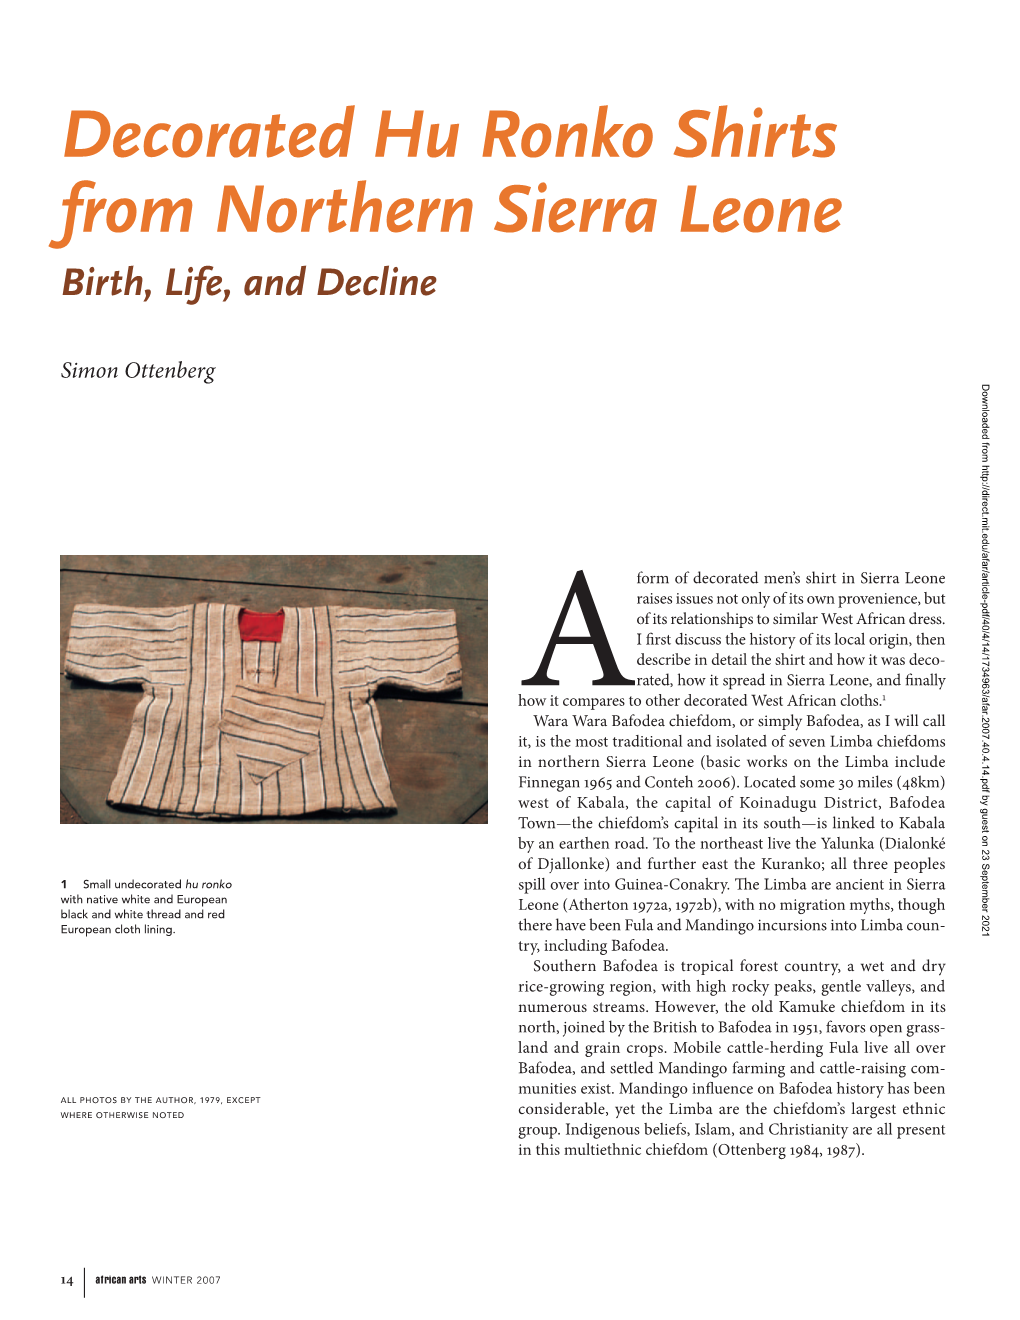 Decorated Hu Ronko Shirts from Northern Sierra Leone Birth, Life, and Decline